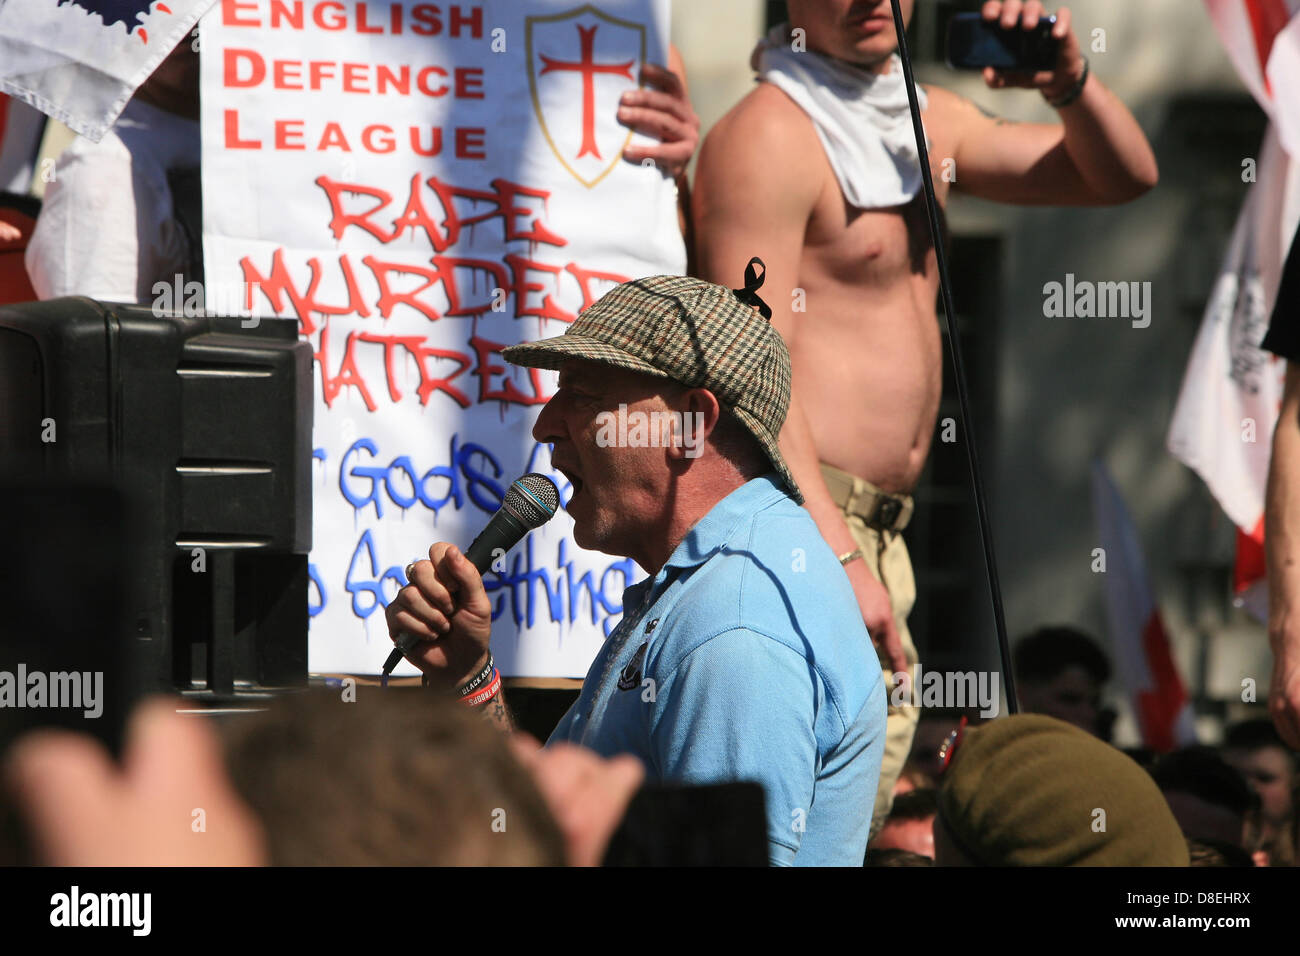 London, UK. 27th May 2013.  The Right-Wing Pressure Group, The English Defence League, Protest Outside Downing Street in Response to the Woolwich Murder of Lee Rigby  Credit:  Mario Mitsis / Alamy Live News Stock Photo